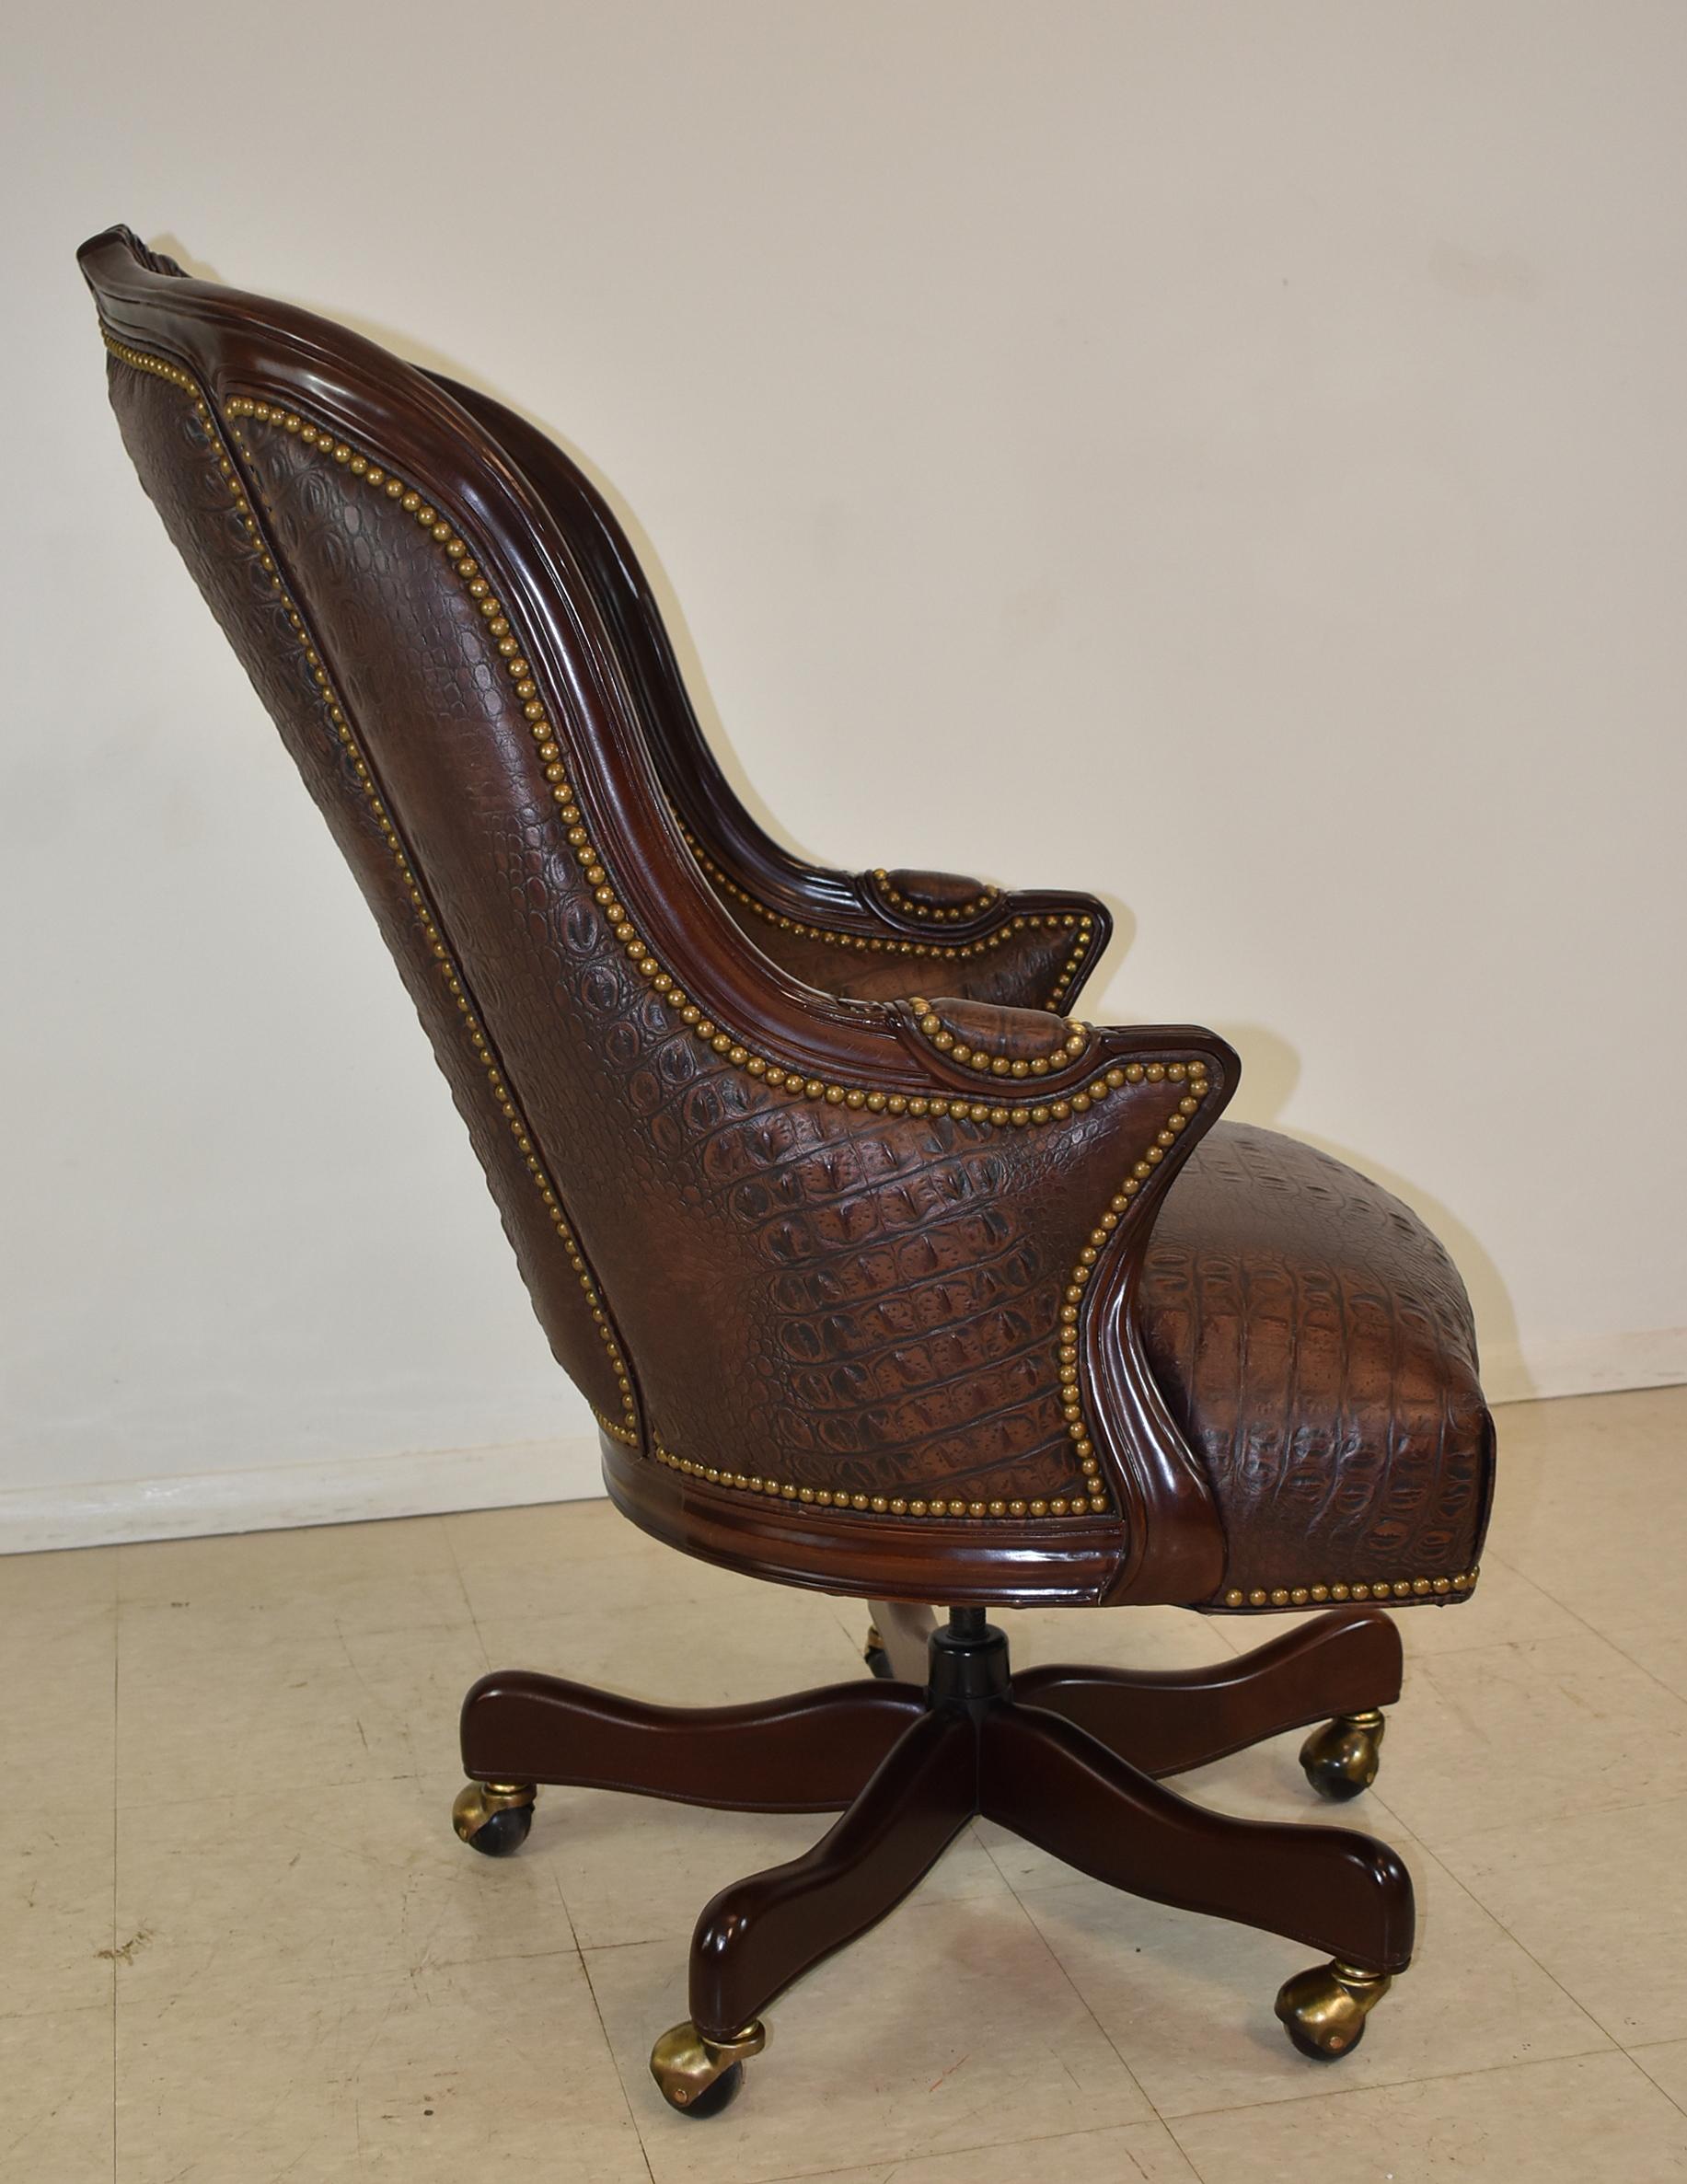 Hancock & Moore executive swivel office chair. Featuring genuine brown leather with a crocodile embossed design. Brass caster wheels. Nail head trim. Very nice to new condition. Dimensions: 33